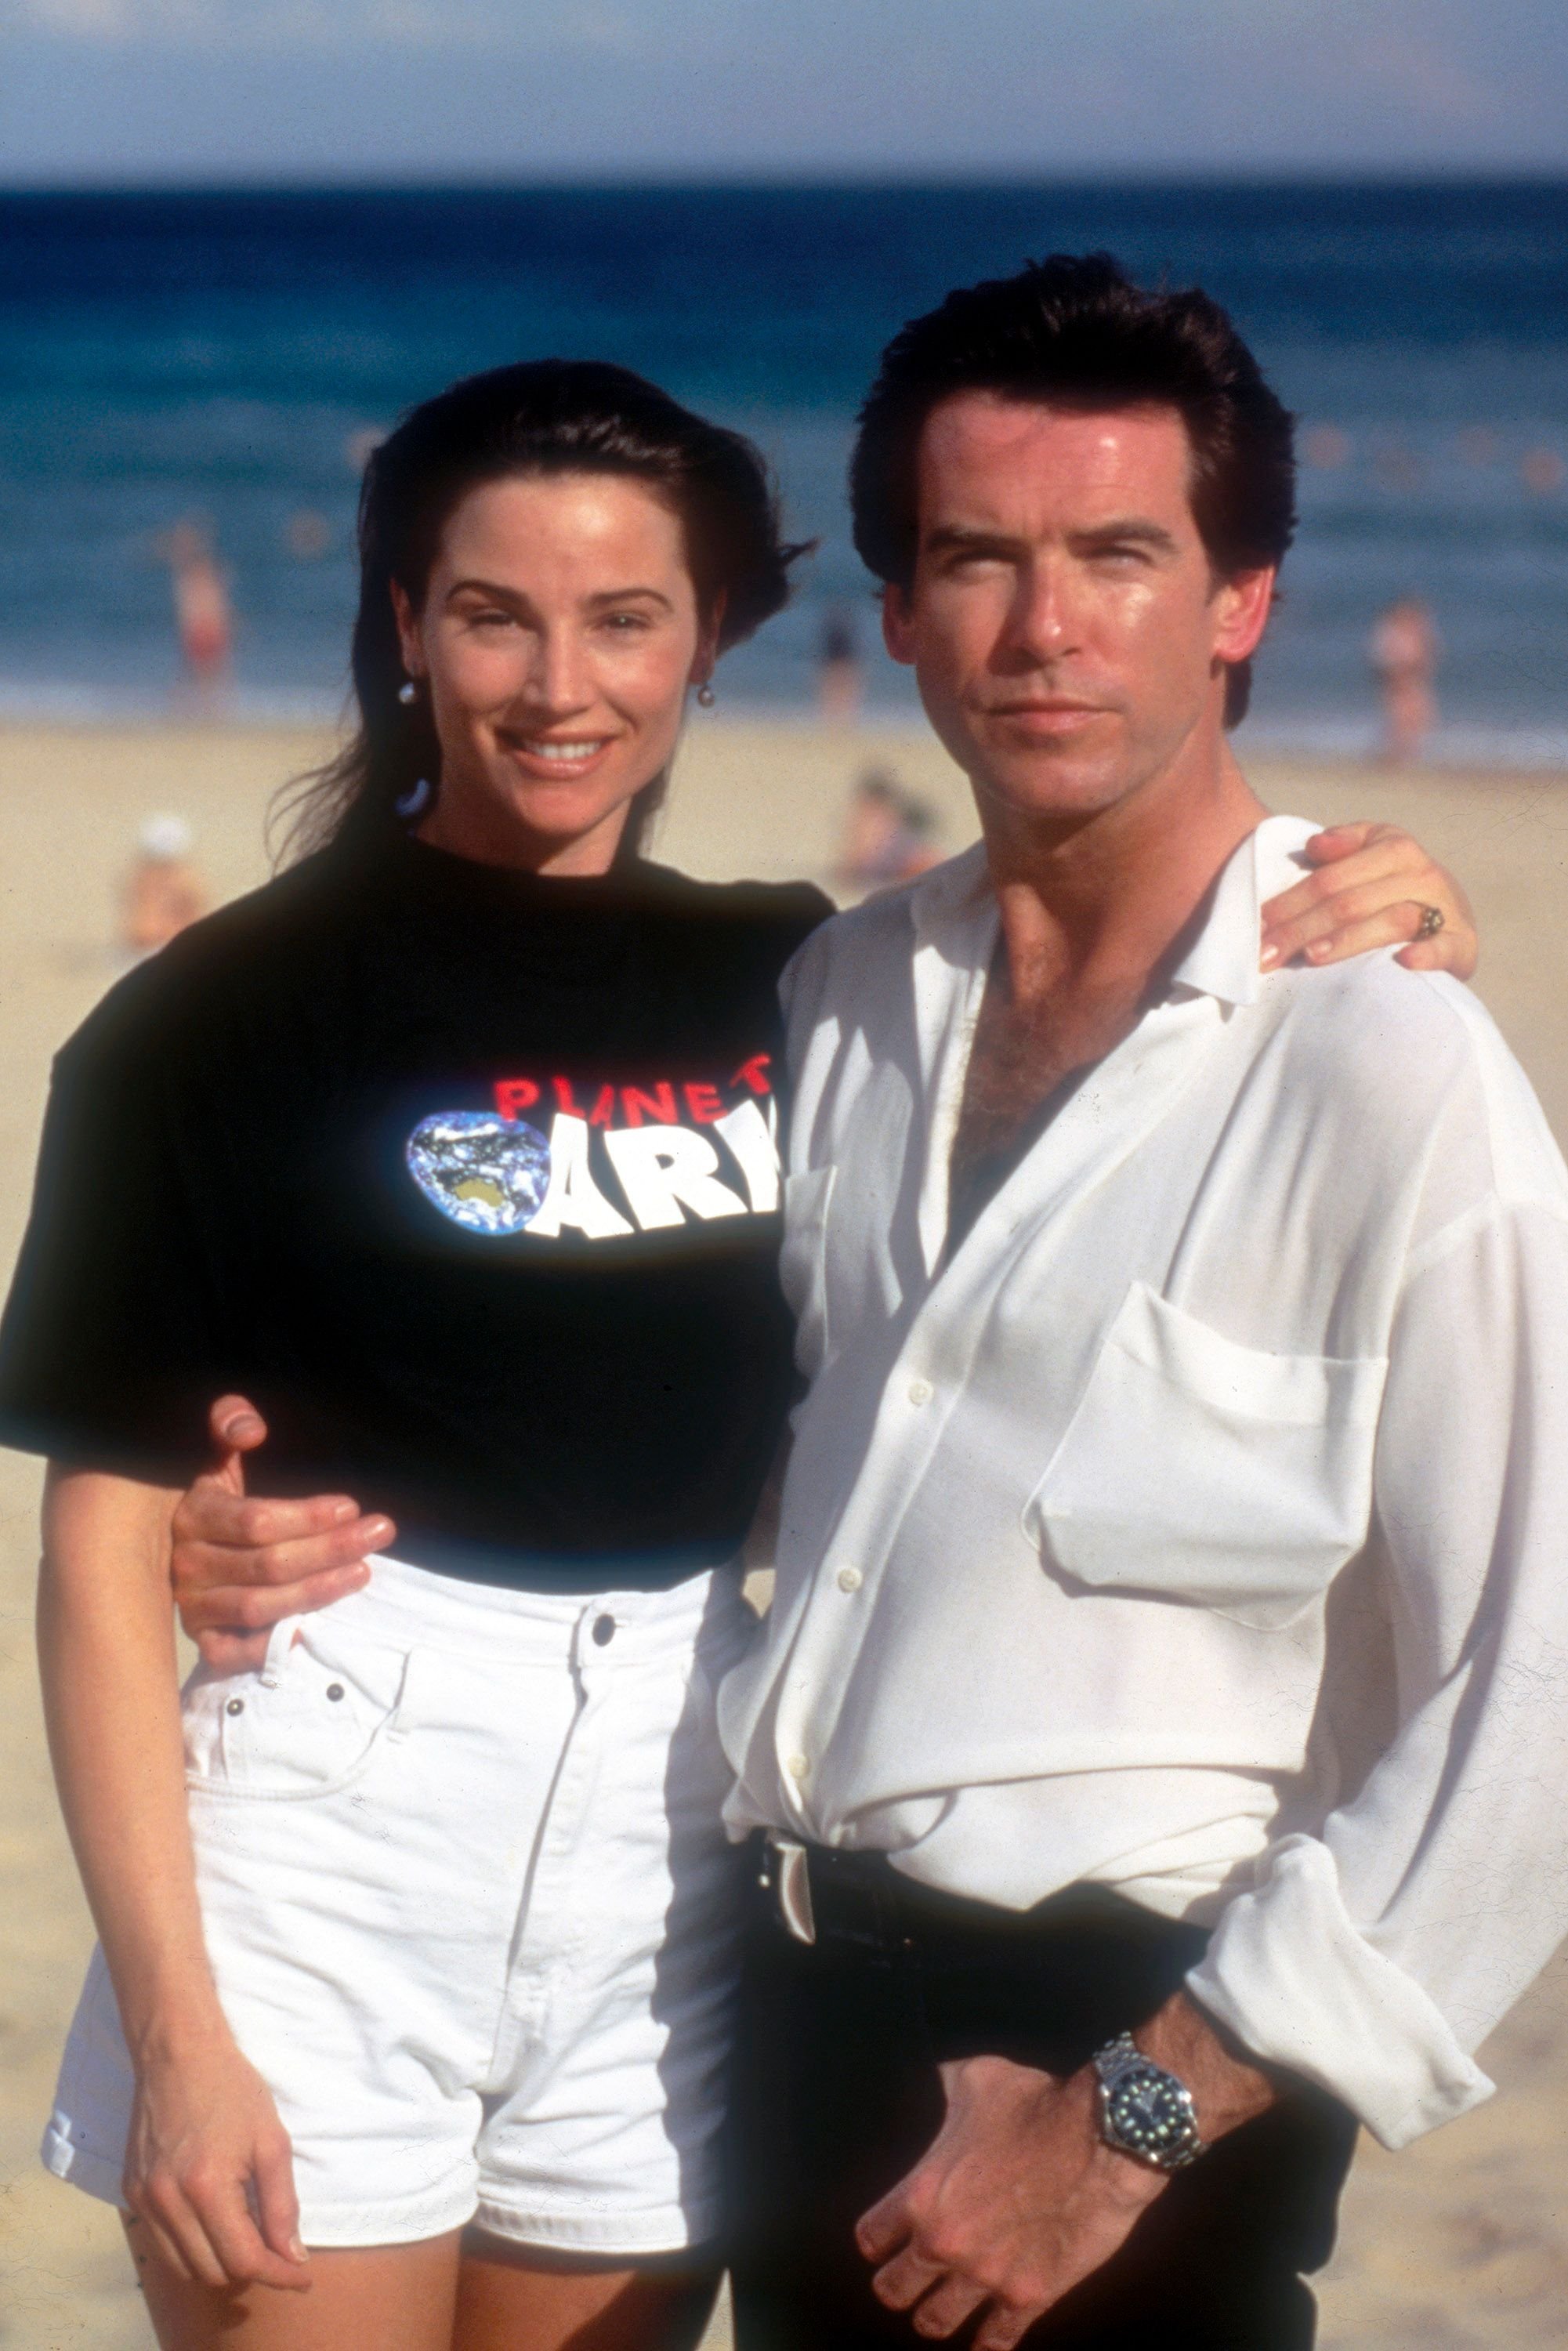 Irish actor Pierce Brosnan (R) with his girlfriend Keely Shaye Smith in Sydney for the premiere of his new James Bond film 'Goldeneye' in 1995 in Sydney, Australia. | Source: Getty Images